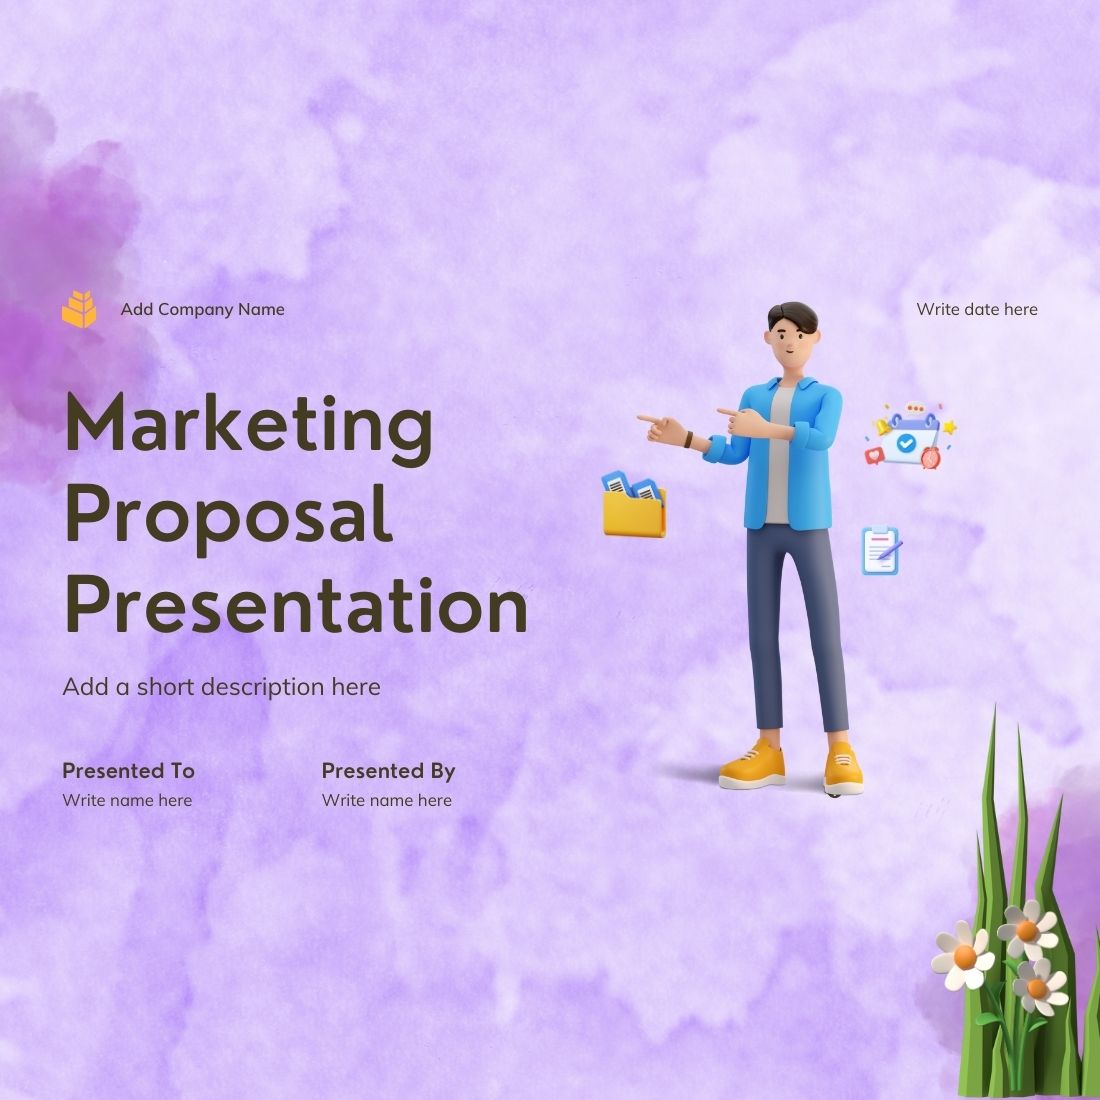 3D Presentation design template about marketing business proposals with a purple background preview image.